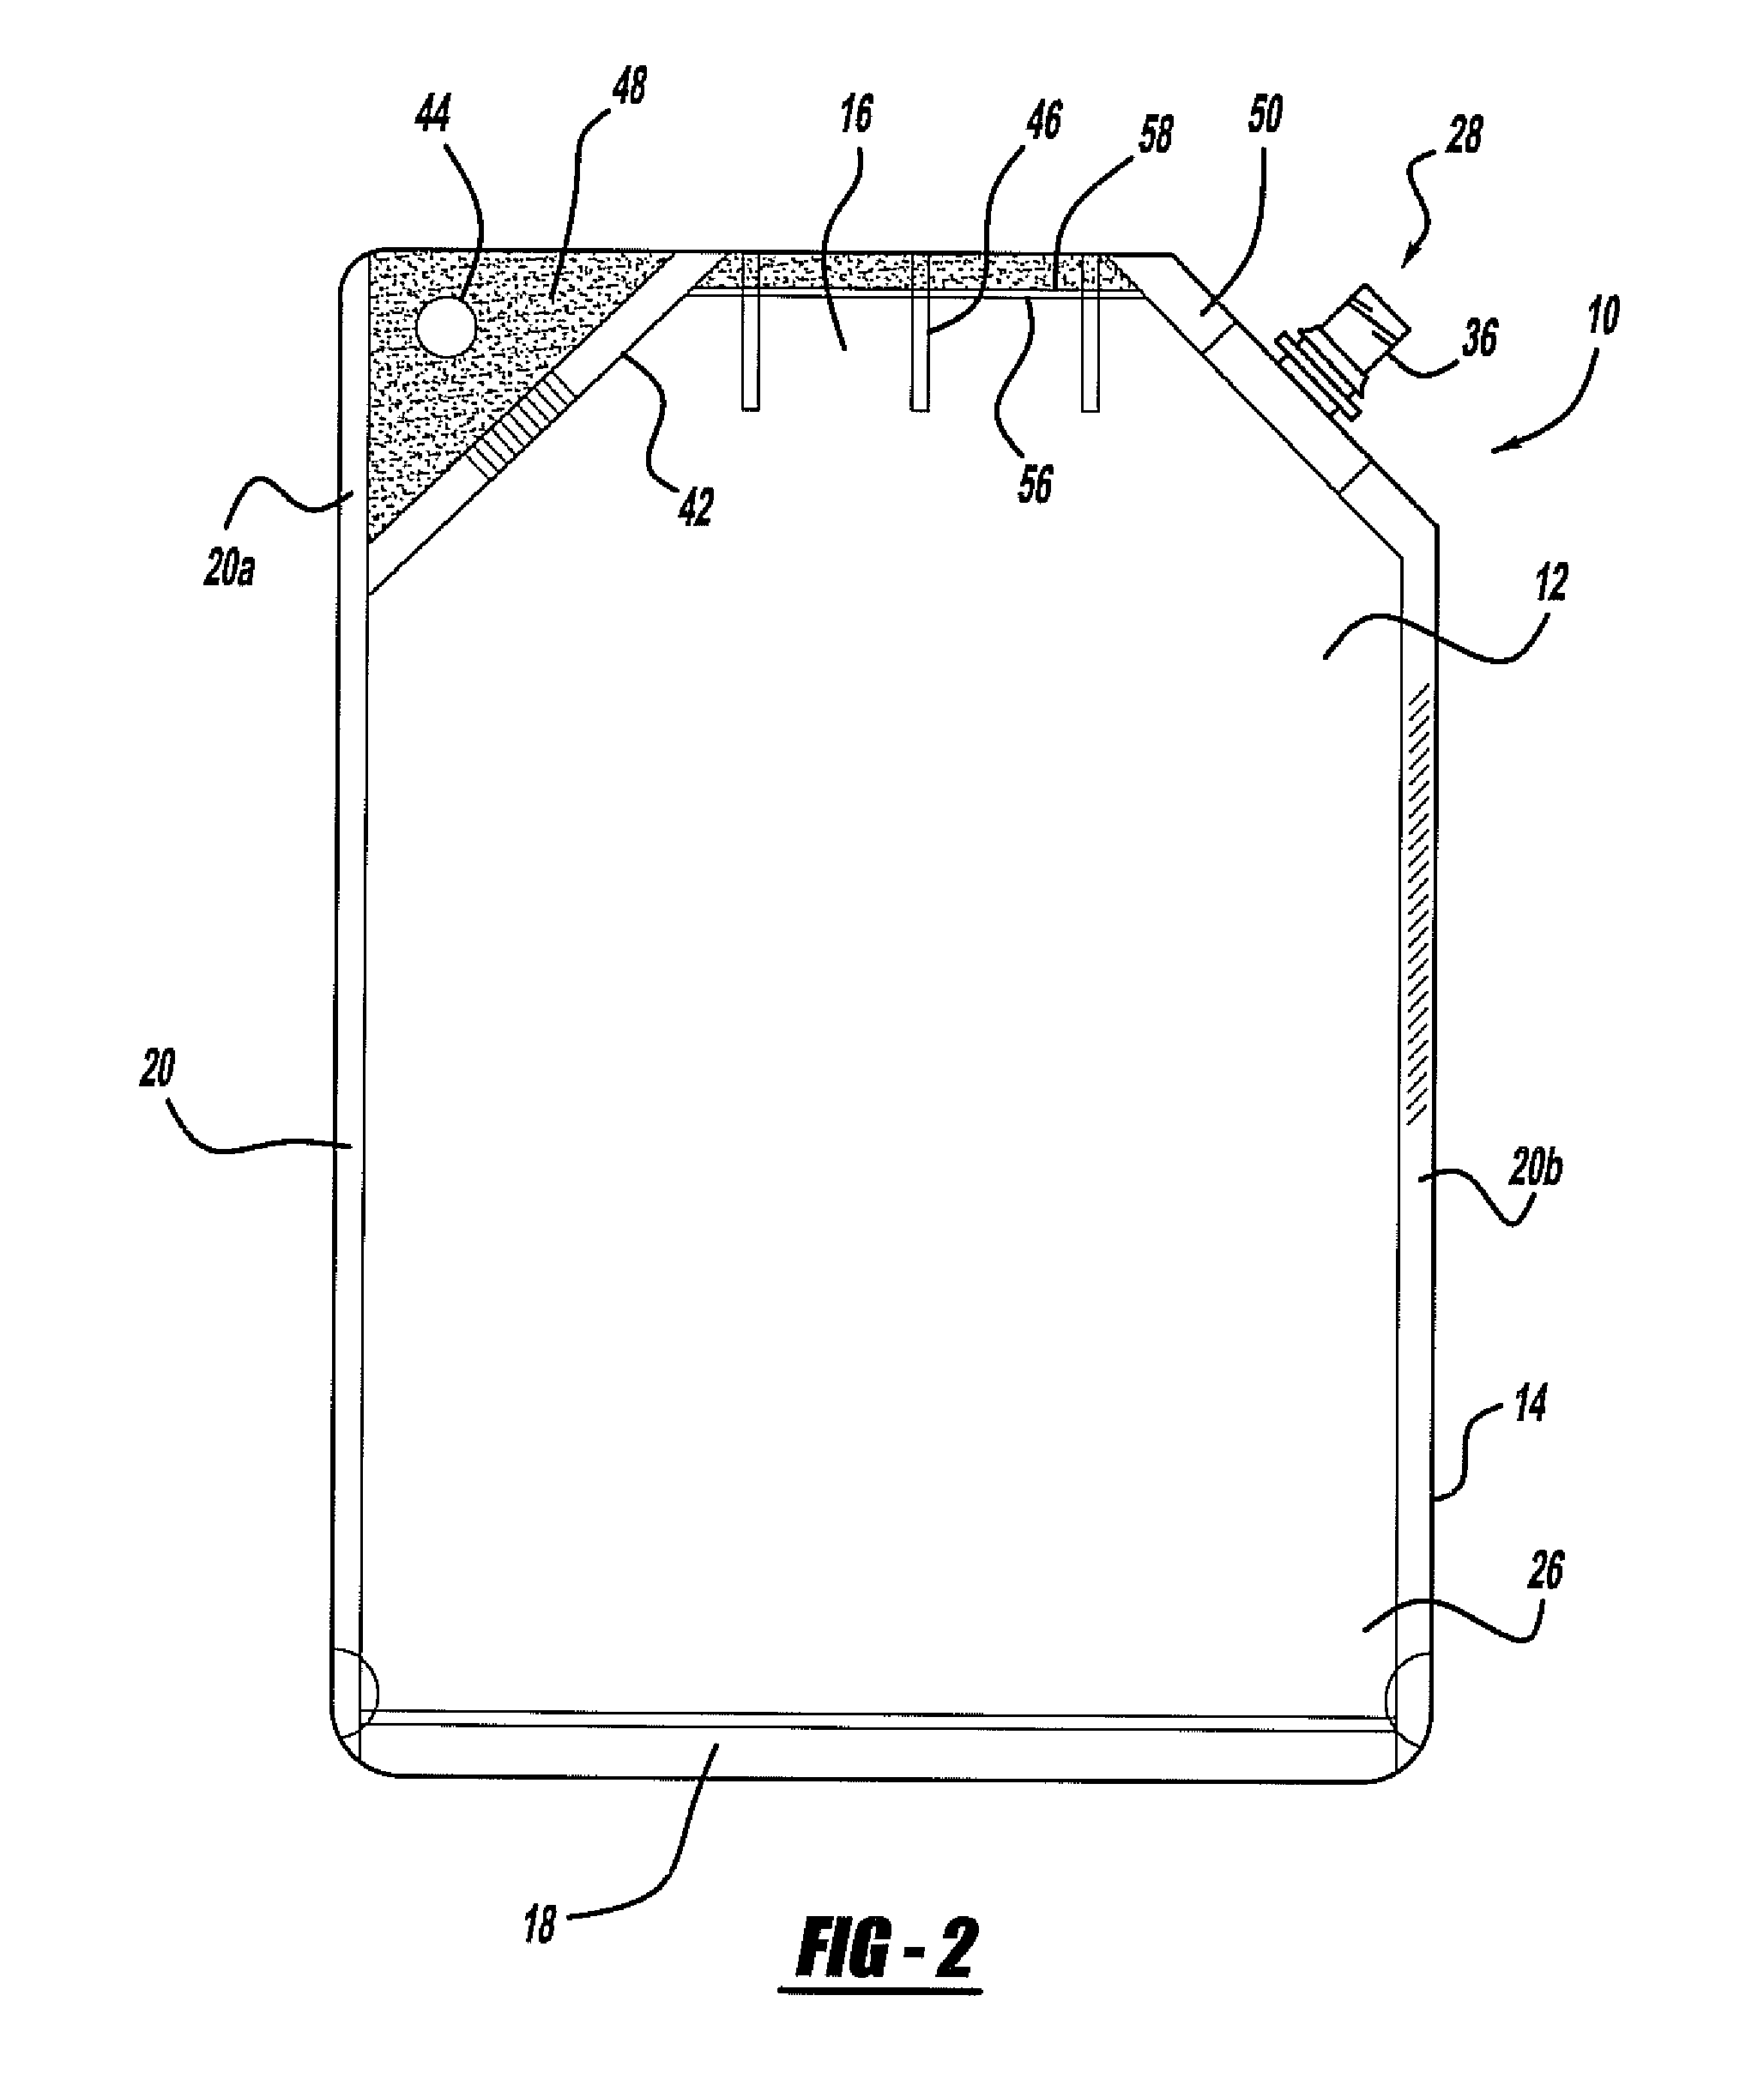 Flexible pouch for an alcoholic beverage and method of forming